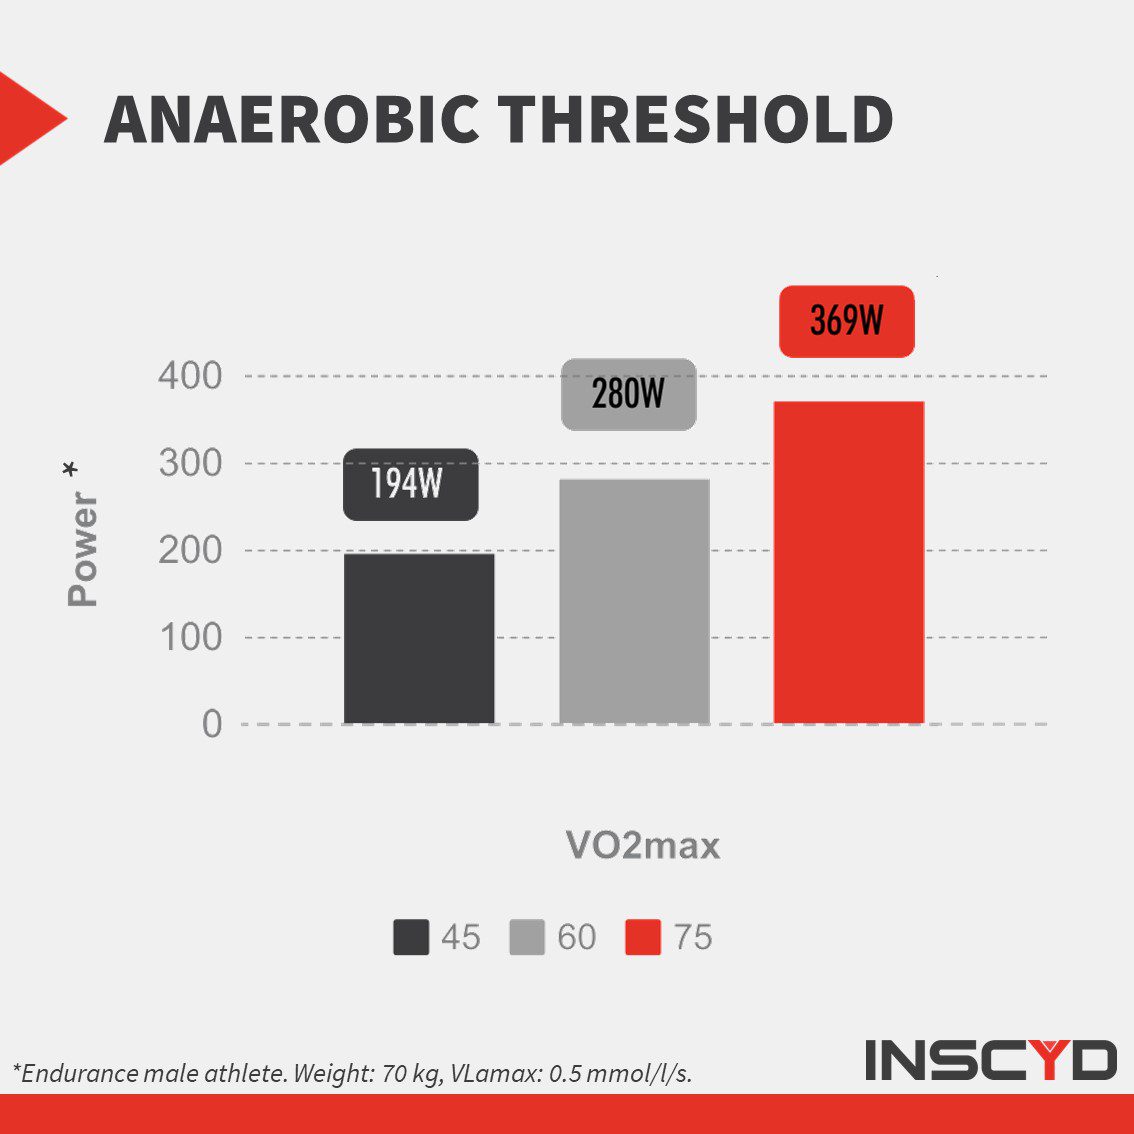 How anaerobic threshold depends on VO2max - INSCYD